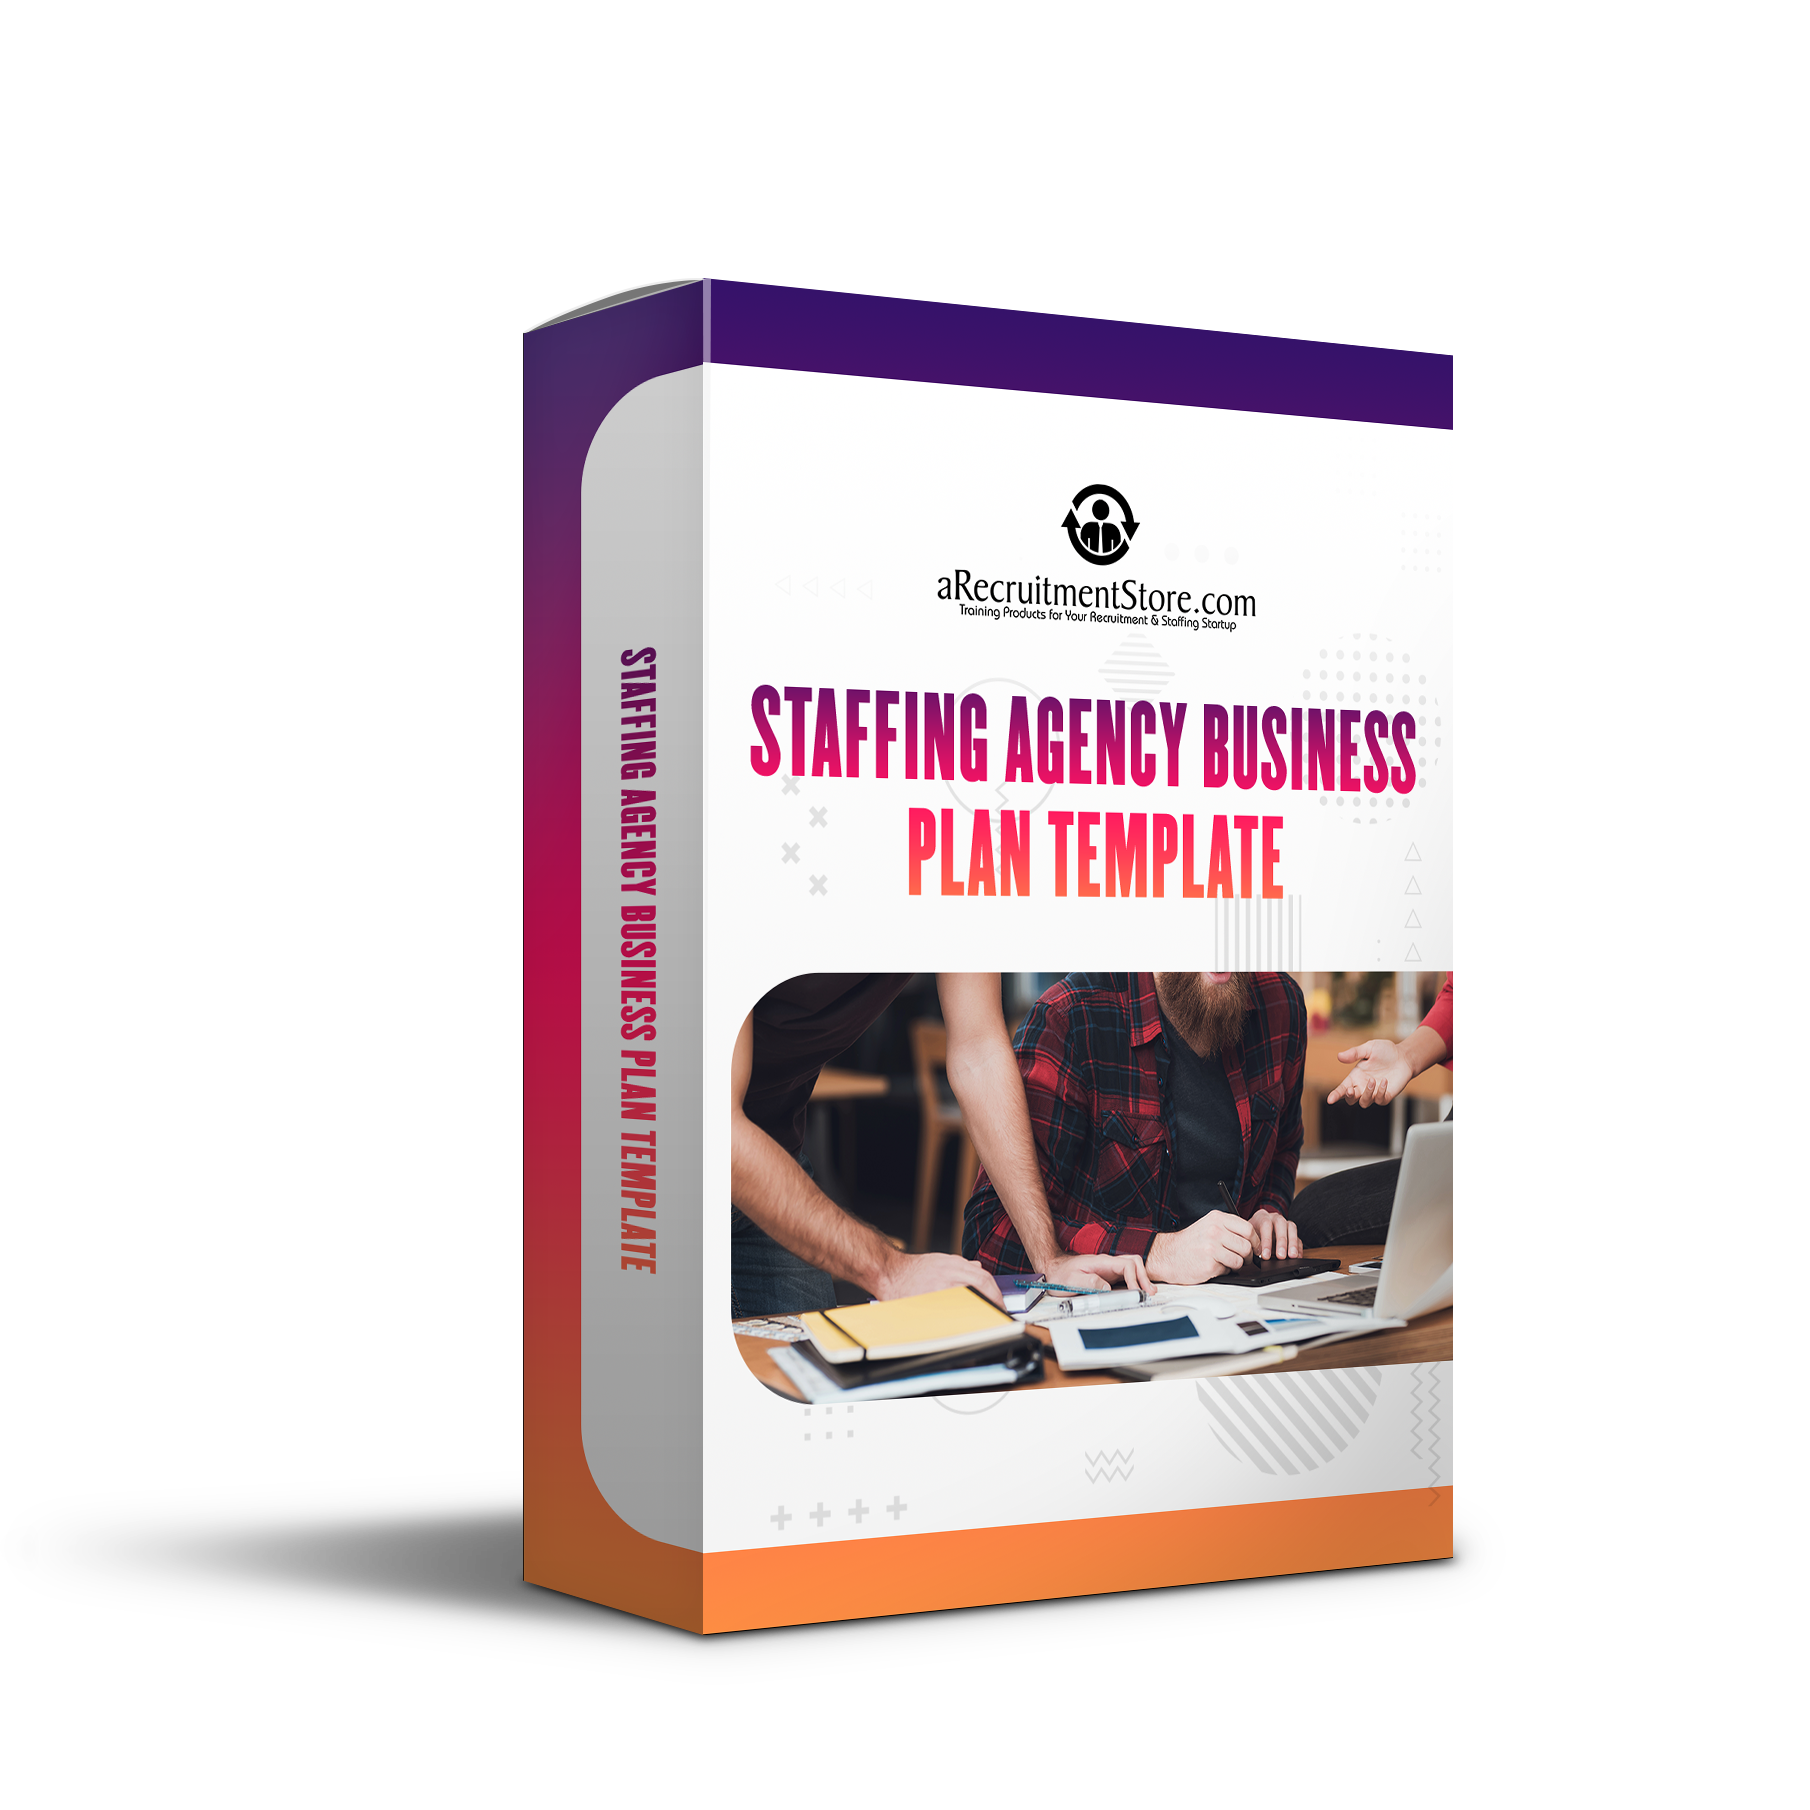 Staffing Agency Business Plan Template - aRecruitmentStore.com Throughout Staffing Agency Business Plan Template